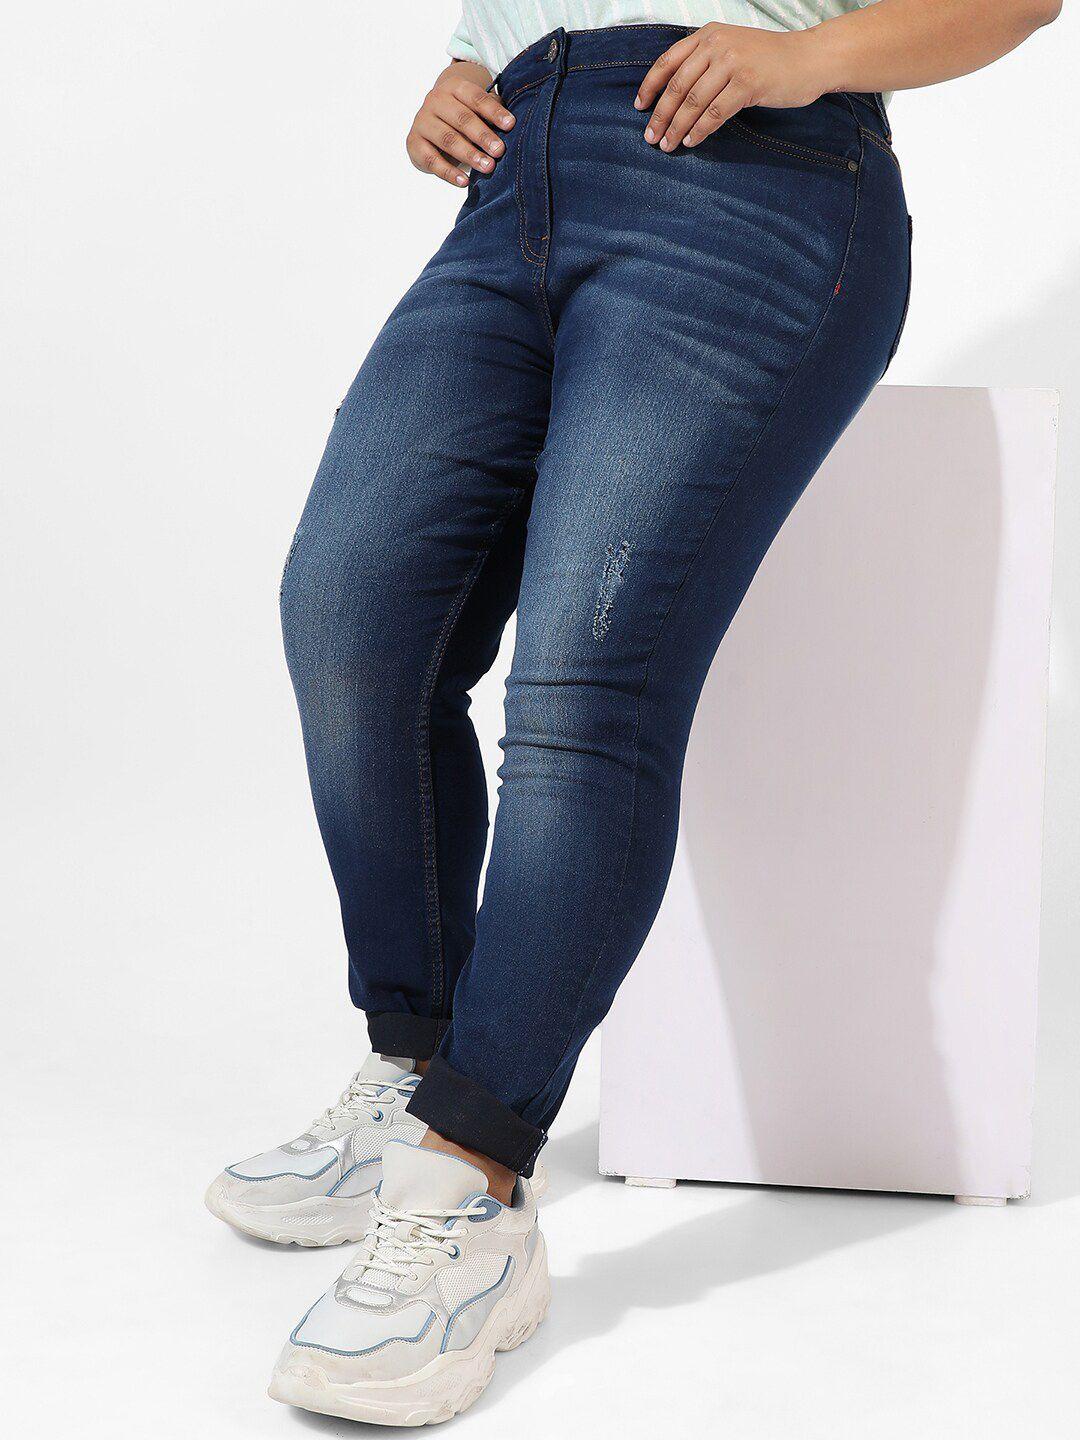 instafab plus plus size women jean skinny fit low distressed light fade stretchable jeans